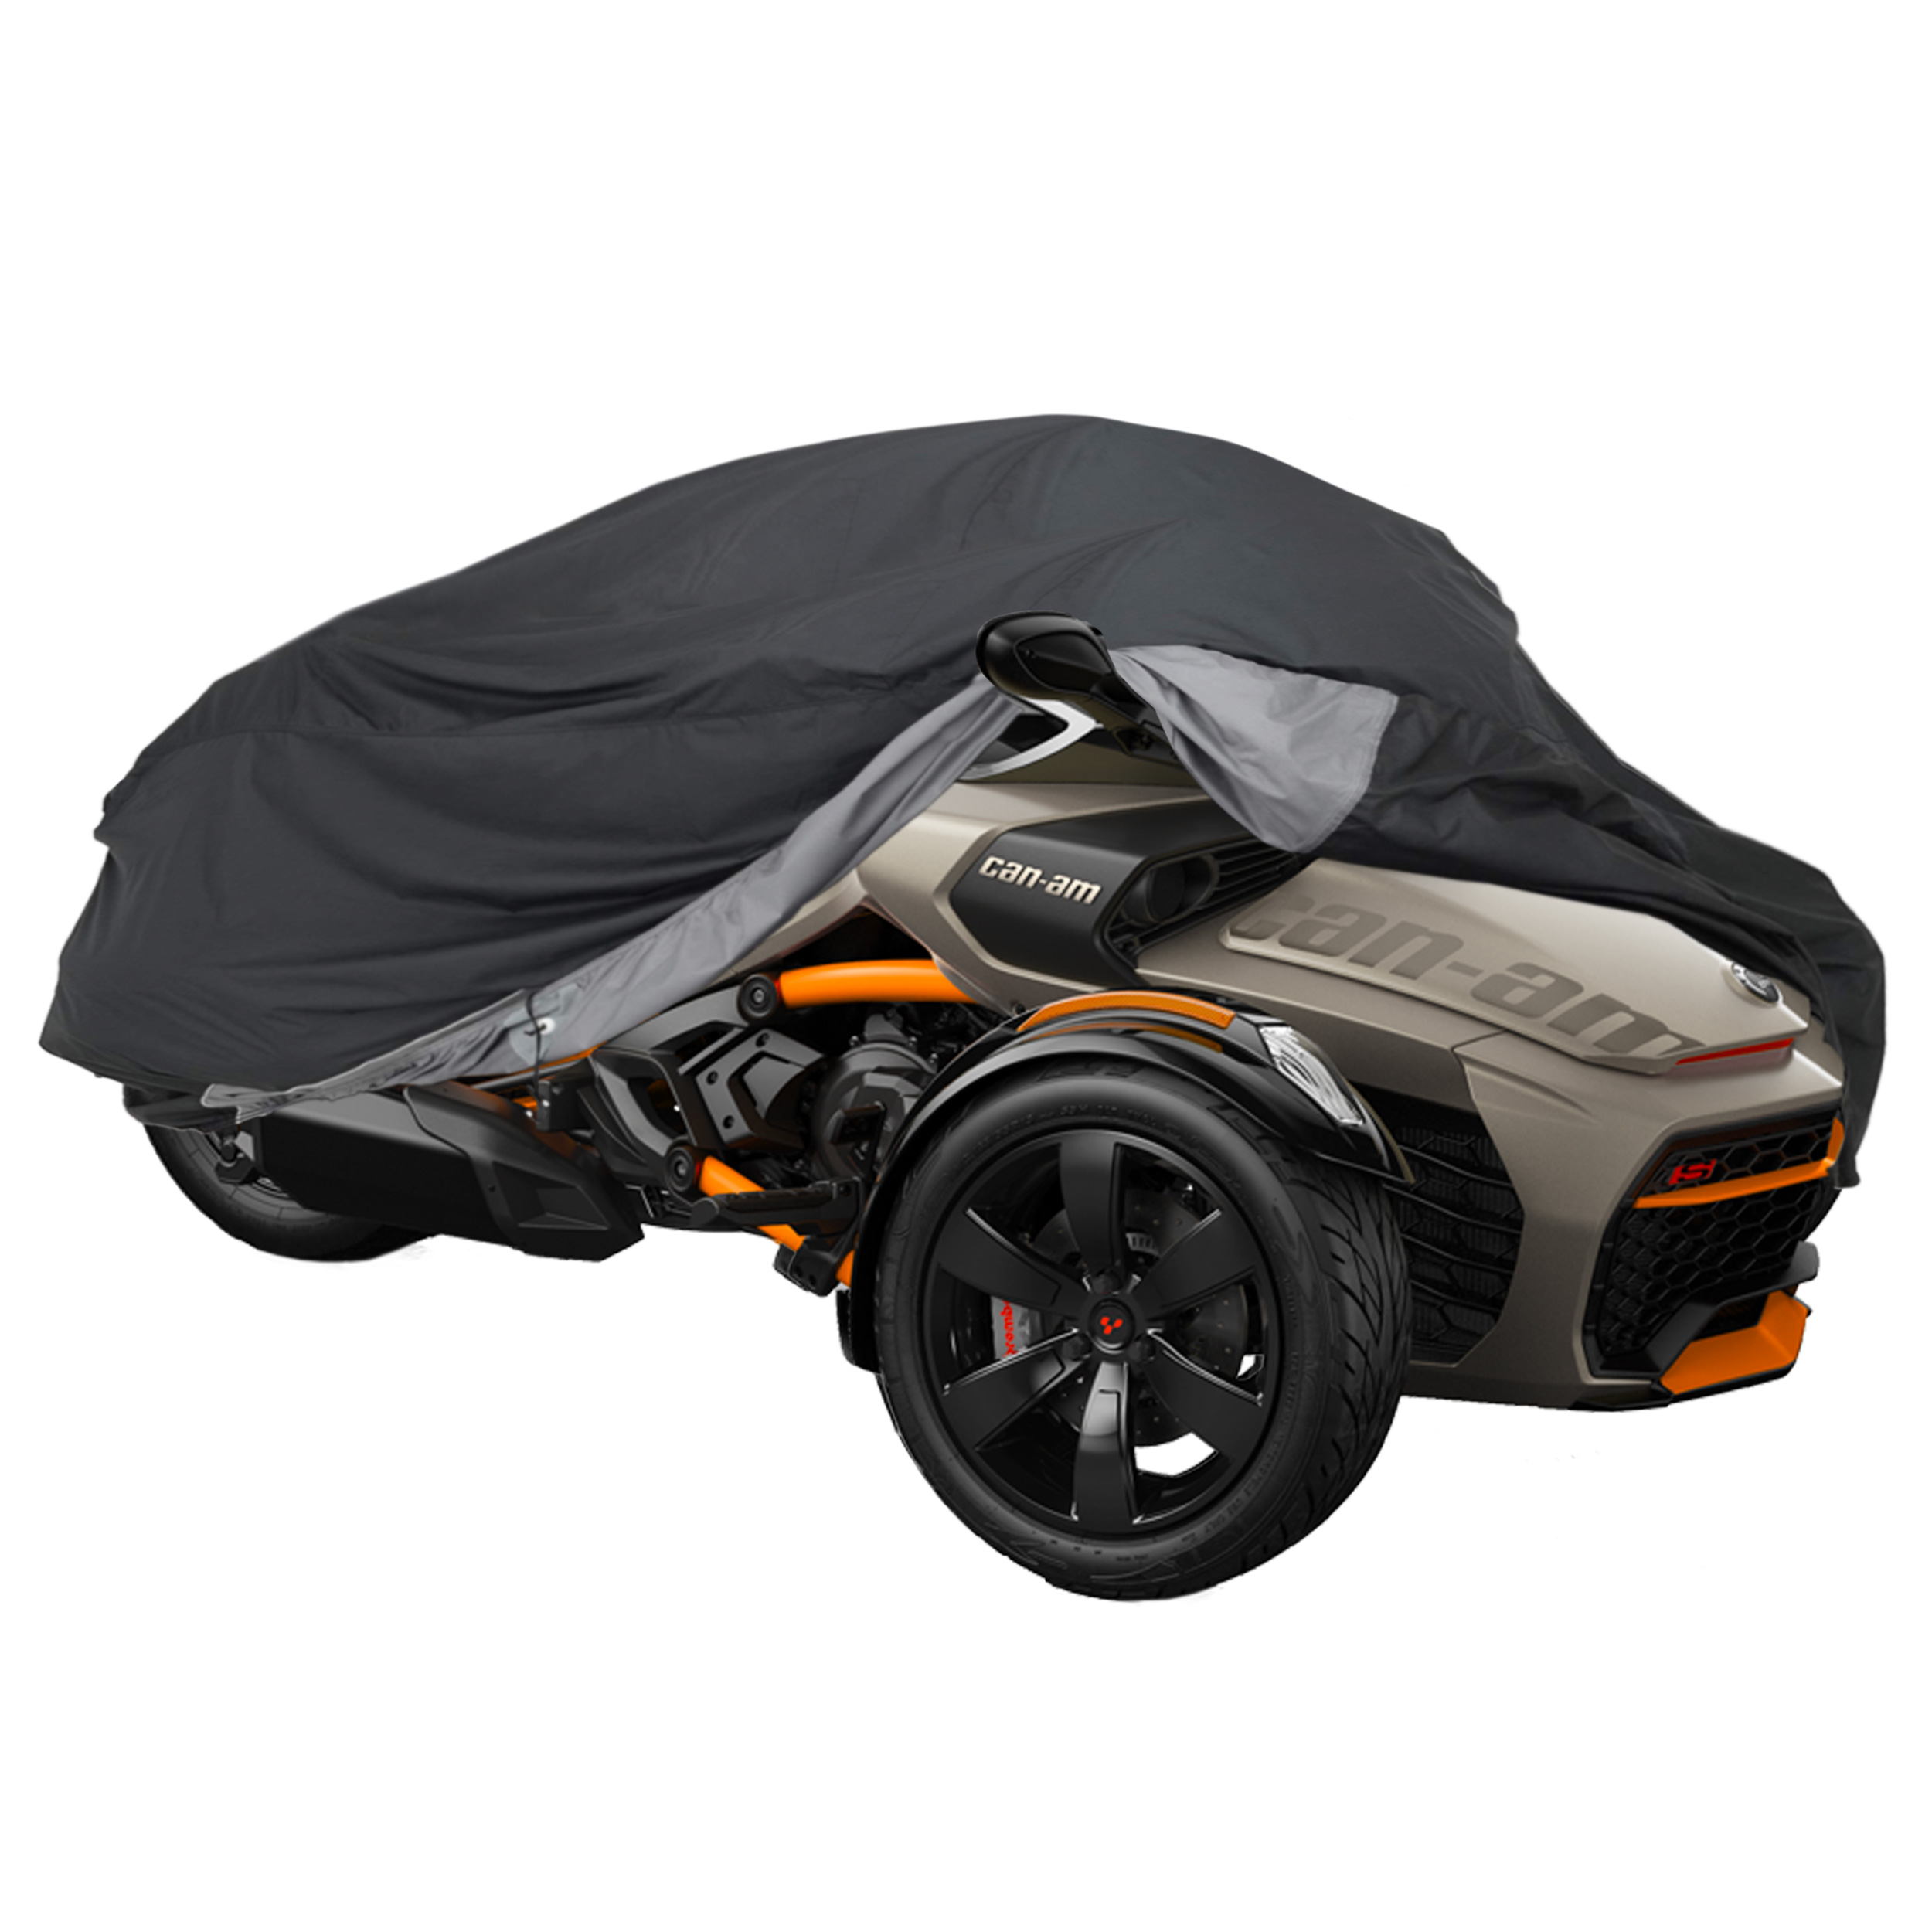 North East Harbor Full Cover Compatible with Can-Am Spyder 2014-2022 F3, F3-S, F3-T Models (Without Trunk) | Waterproof, Weather Resistant Fabric,